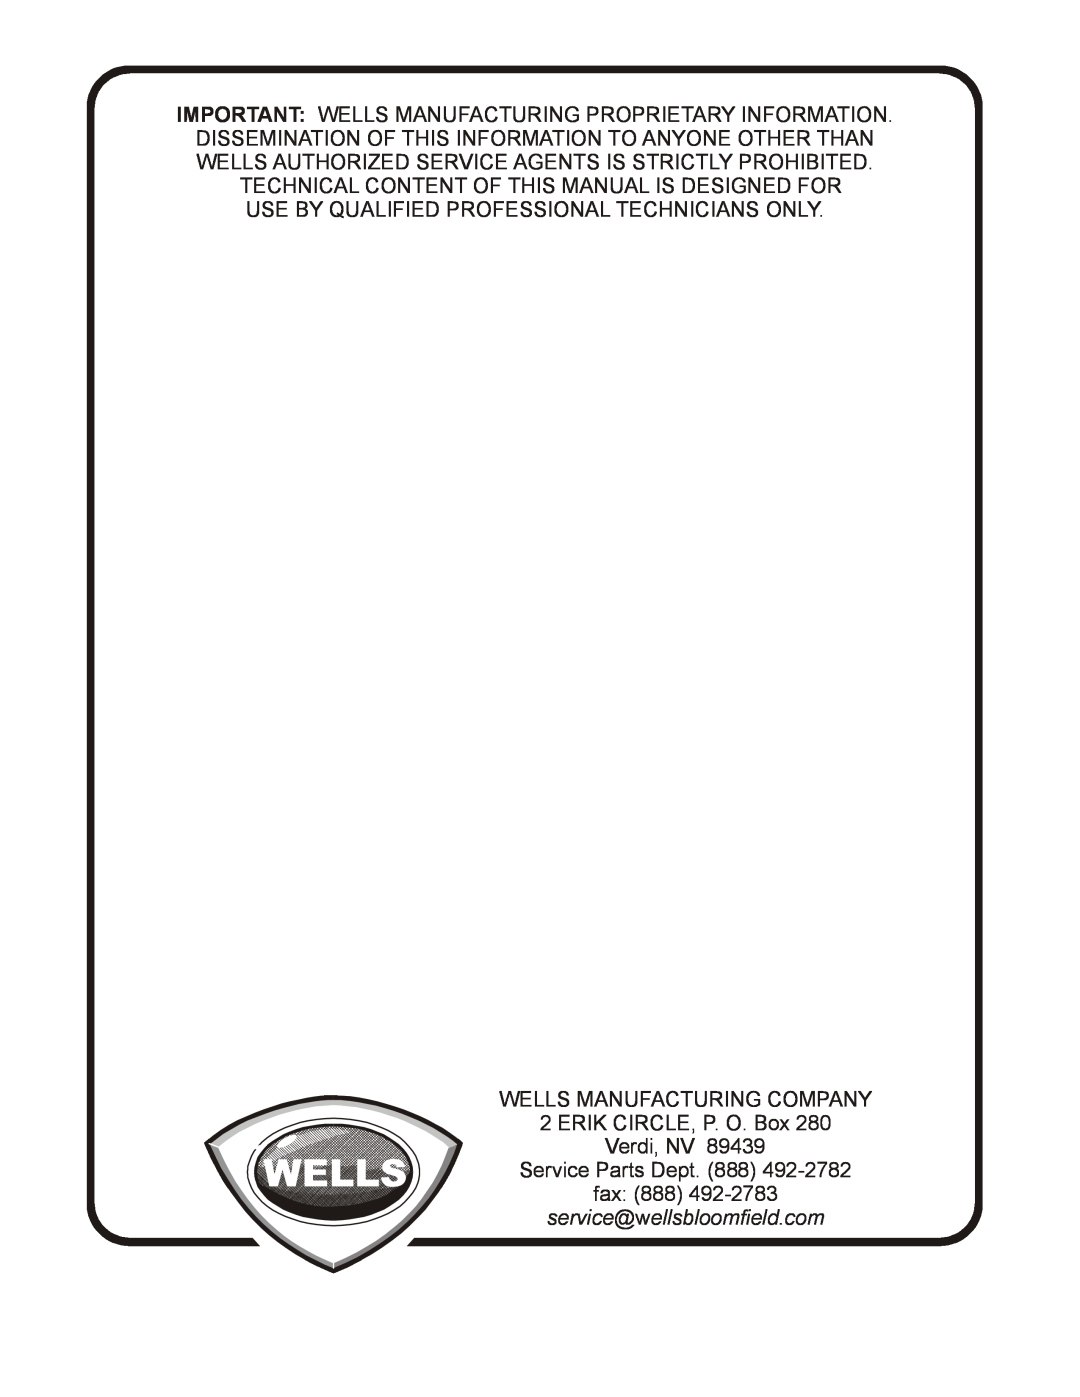 Wells WFGA-60FS service manual Use By Qualified Professional Technicians Only, Service Parts Dept. 888 fax 888 